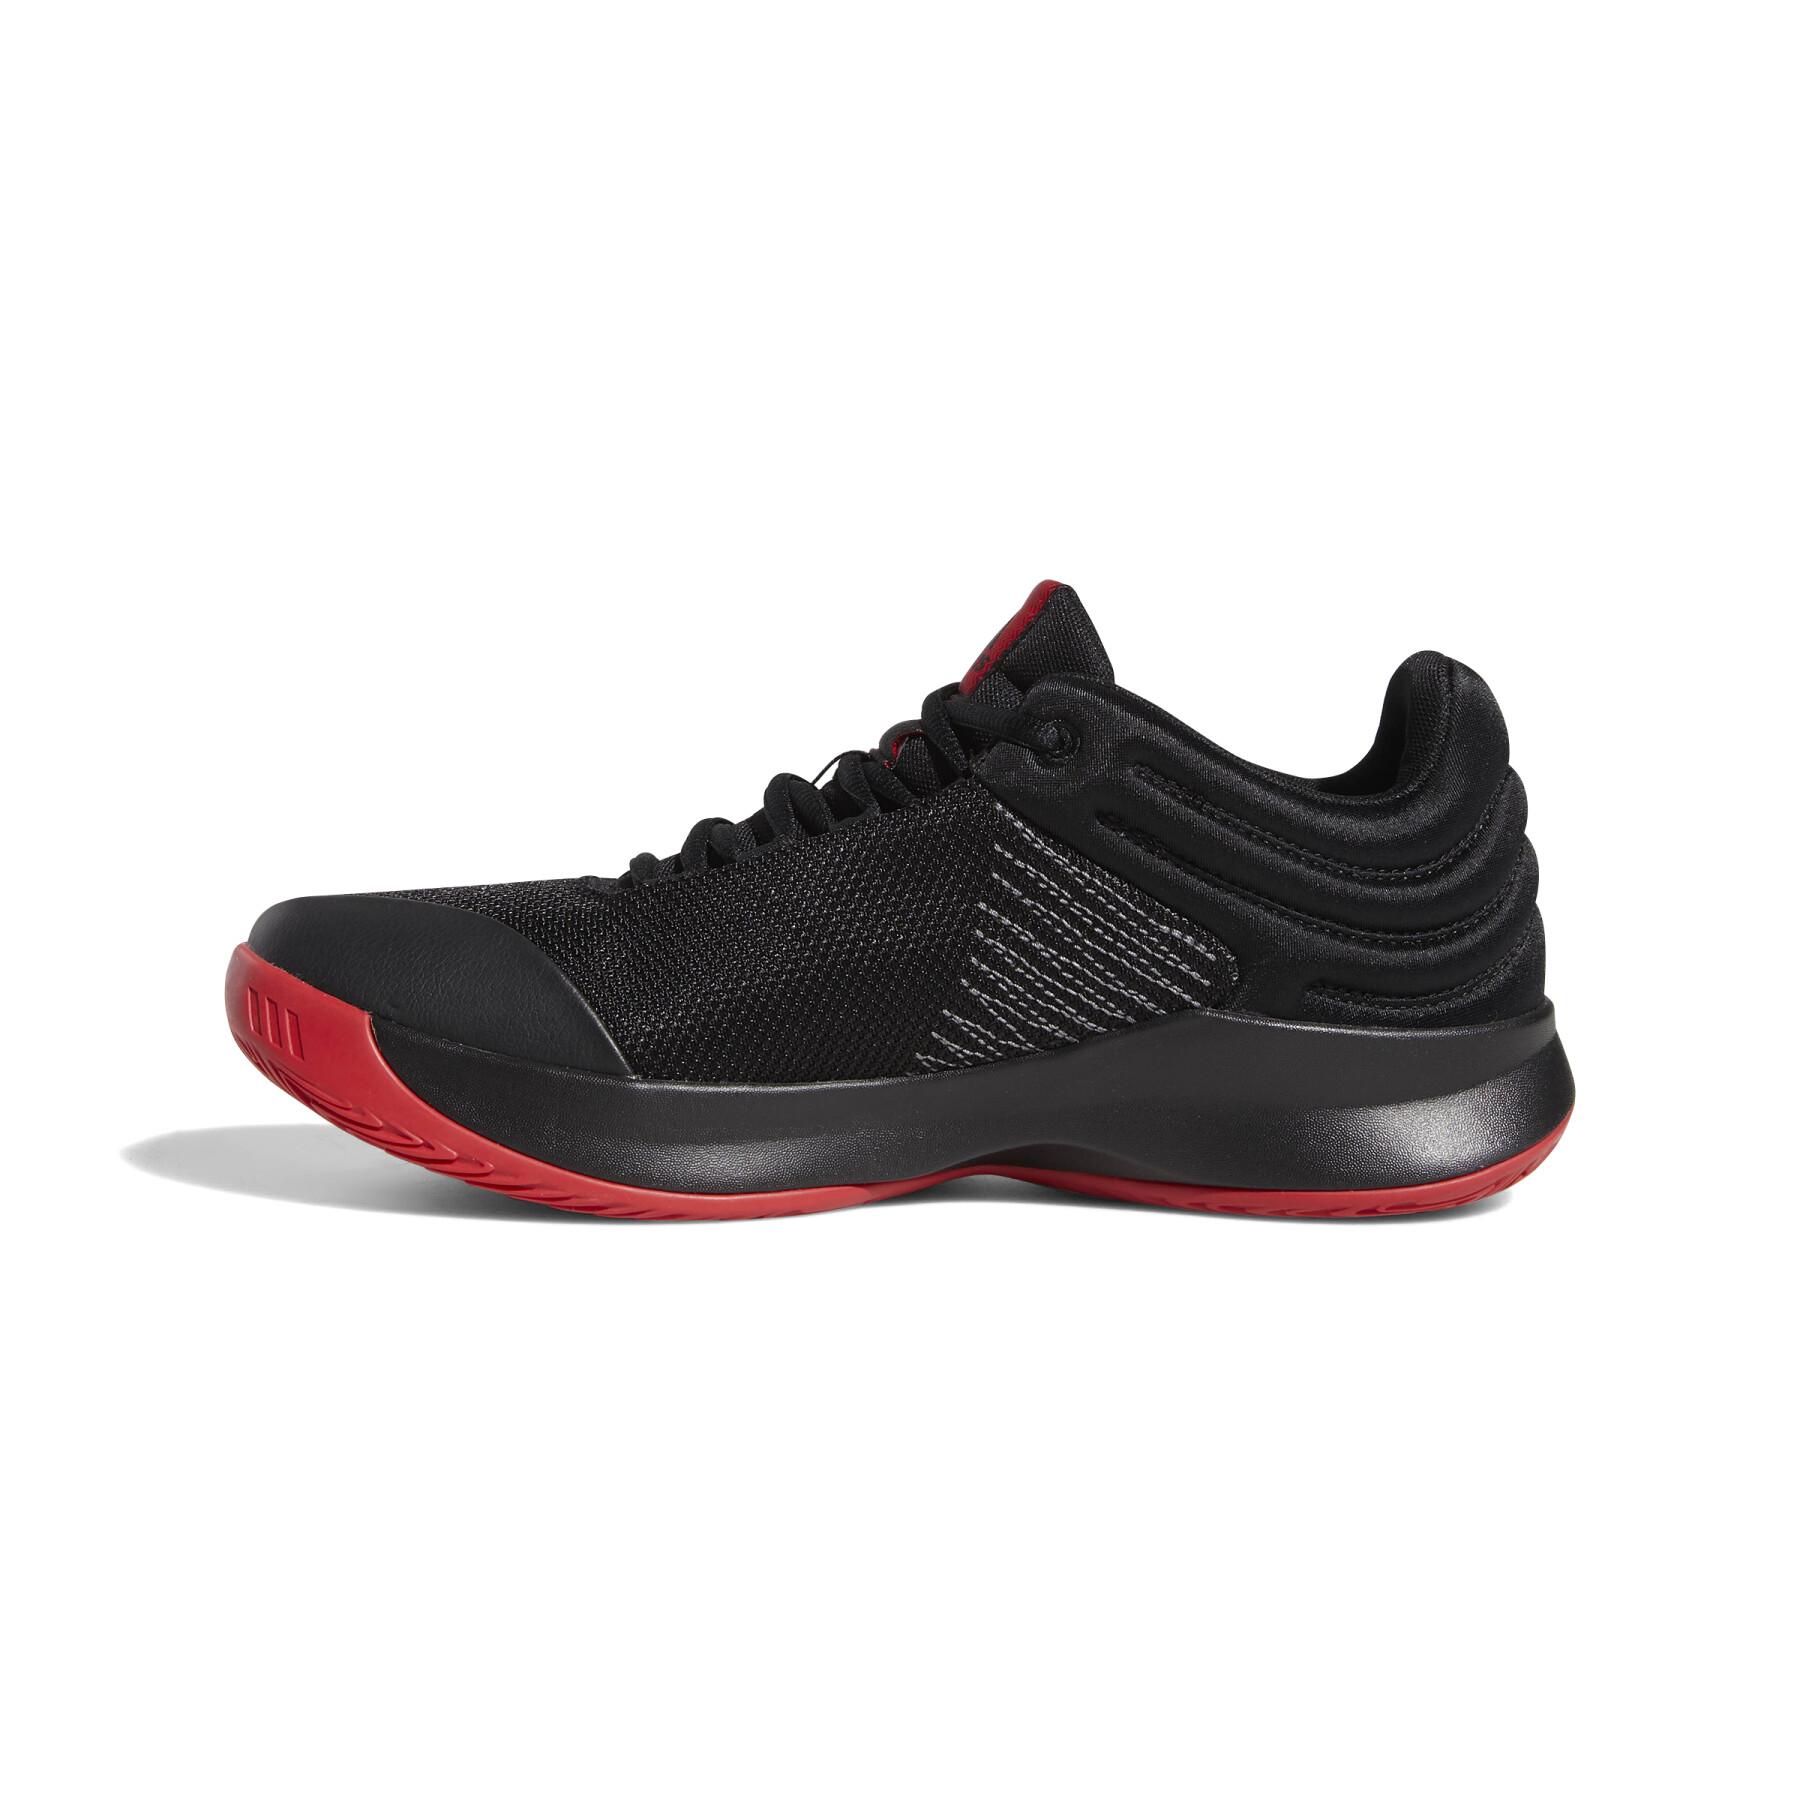 Chaussures indoor adidas Pro Spark 2018 Low